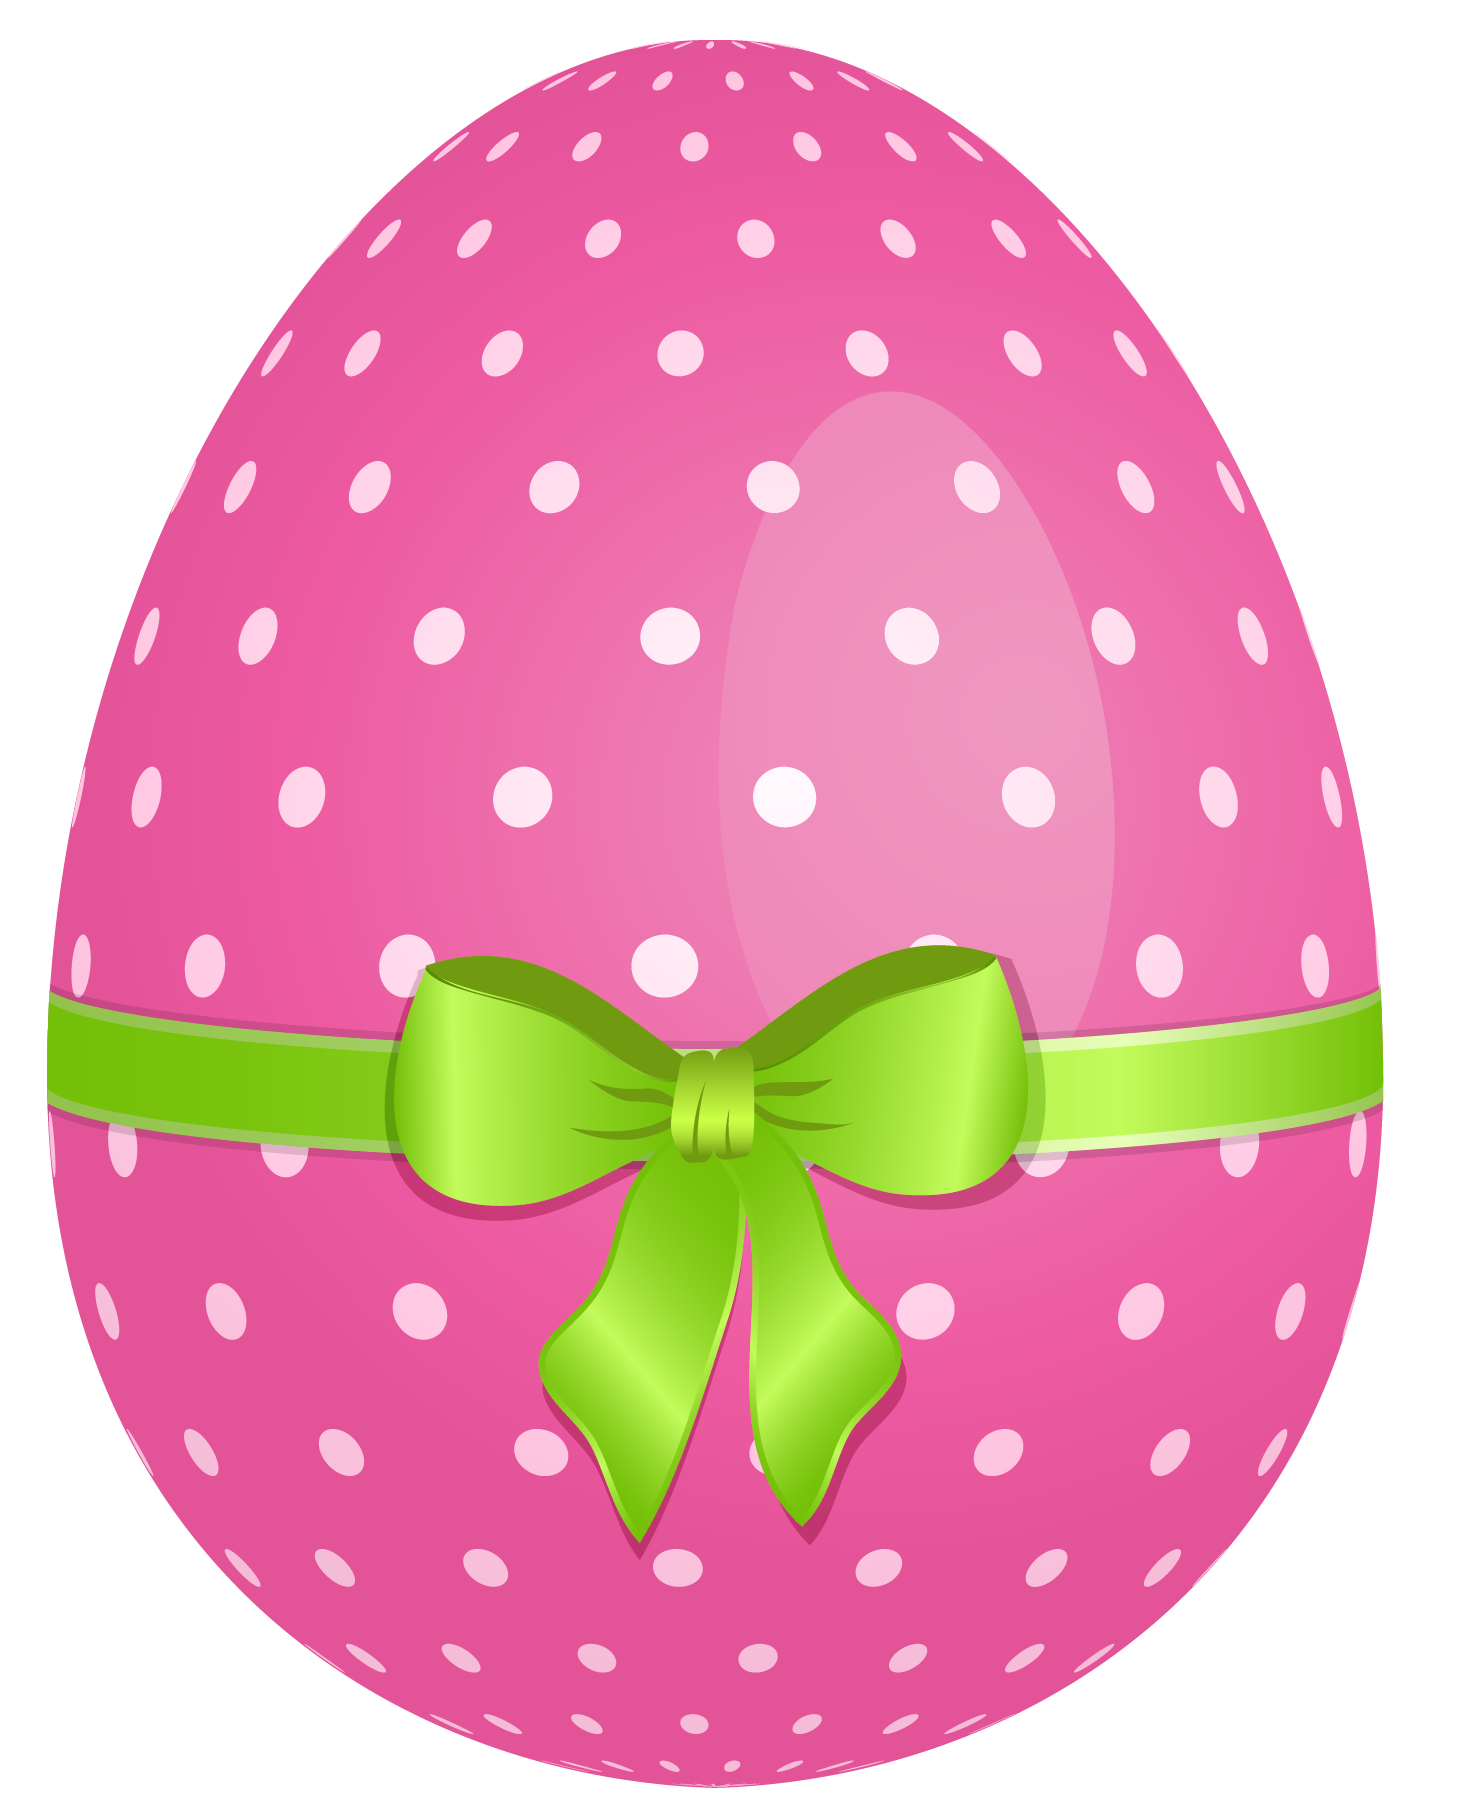 Free Egg Easter Egg Collection Png Image Clipart